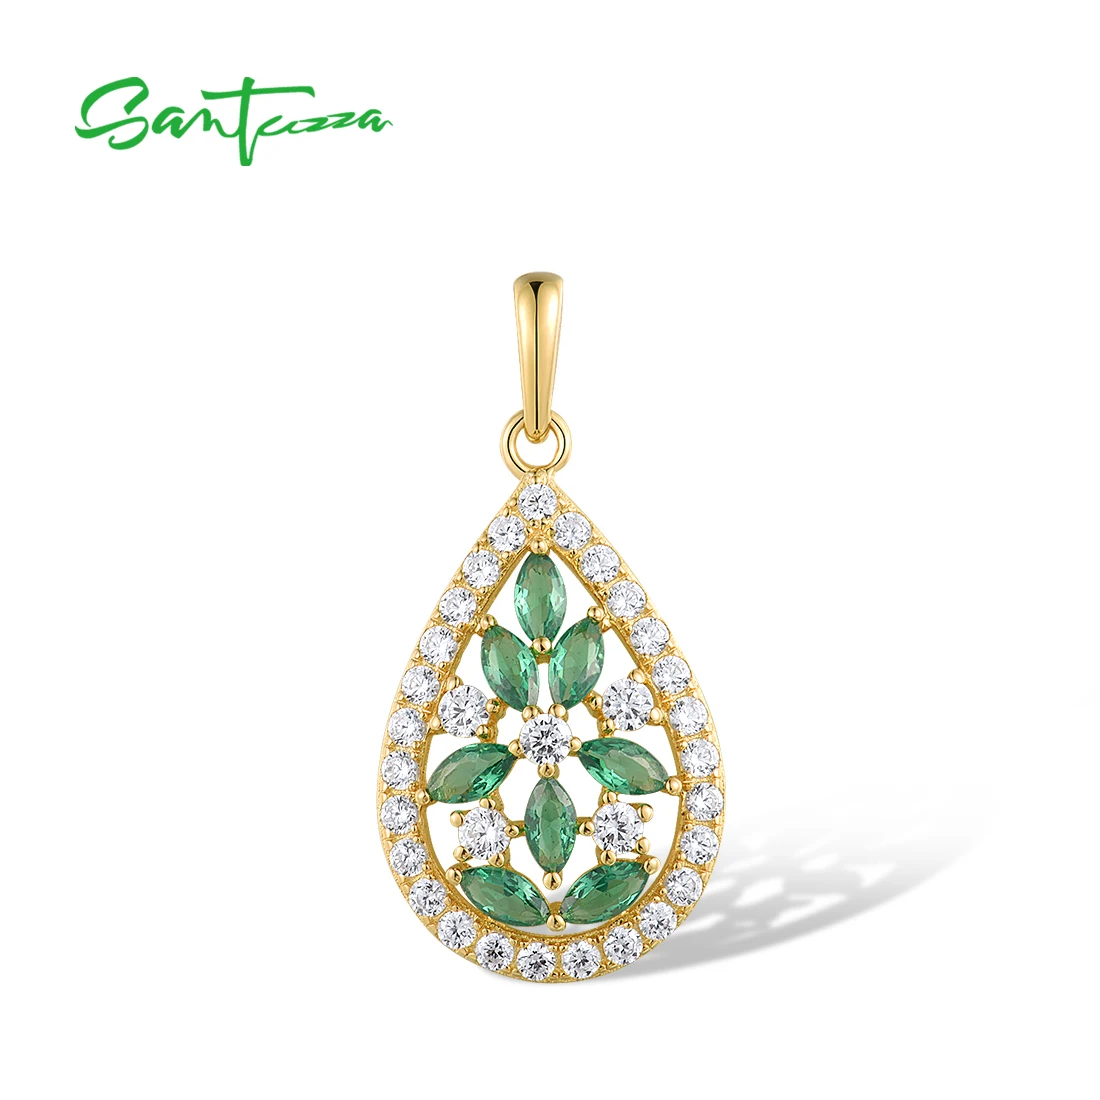 

SANTUZZA 925 Sterling Silver Pendant For Women Sparkling Green Spinel White CZ Elegant Wedding Engagement Gifts Fine Jewelry